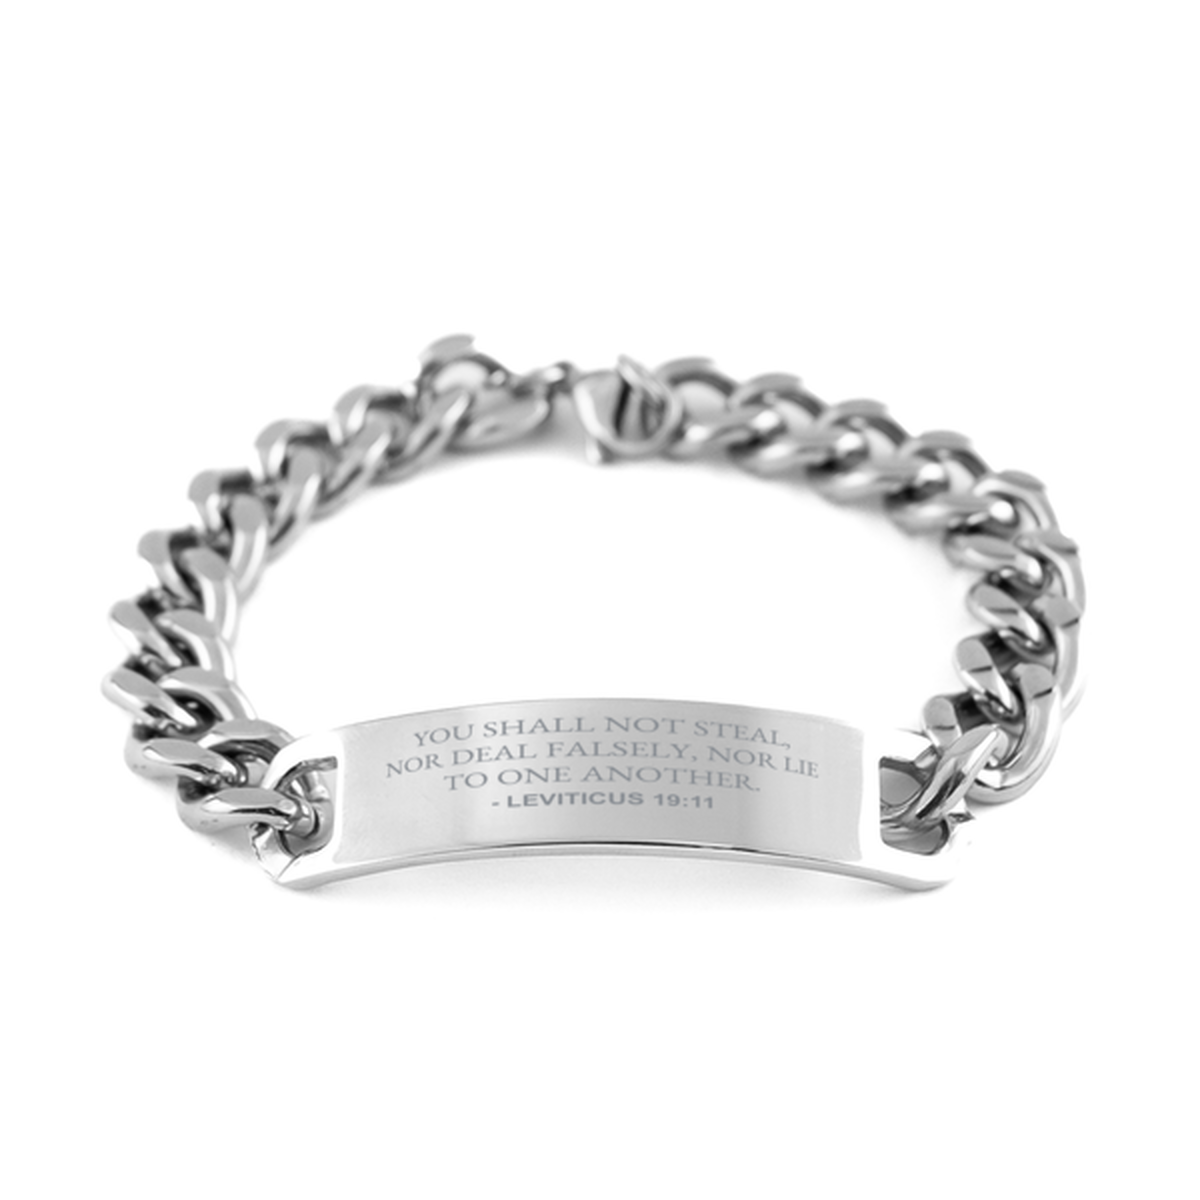 Bible Verse Chain Stainless Steel Bracelet, Leviticus 19:11 You Shall Not Steal, Nor Deal Falsely, Nor Lie To, Inspirational Christian Gifts For Men Women